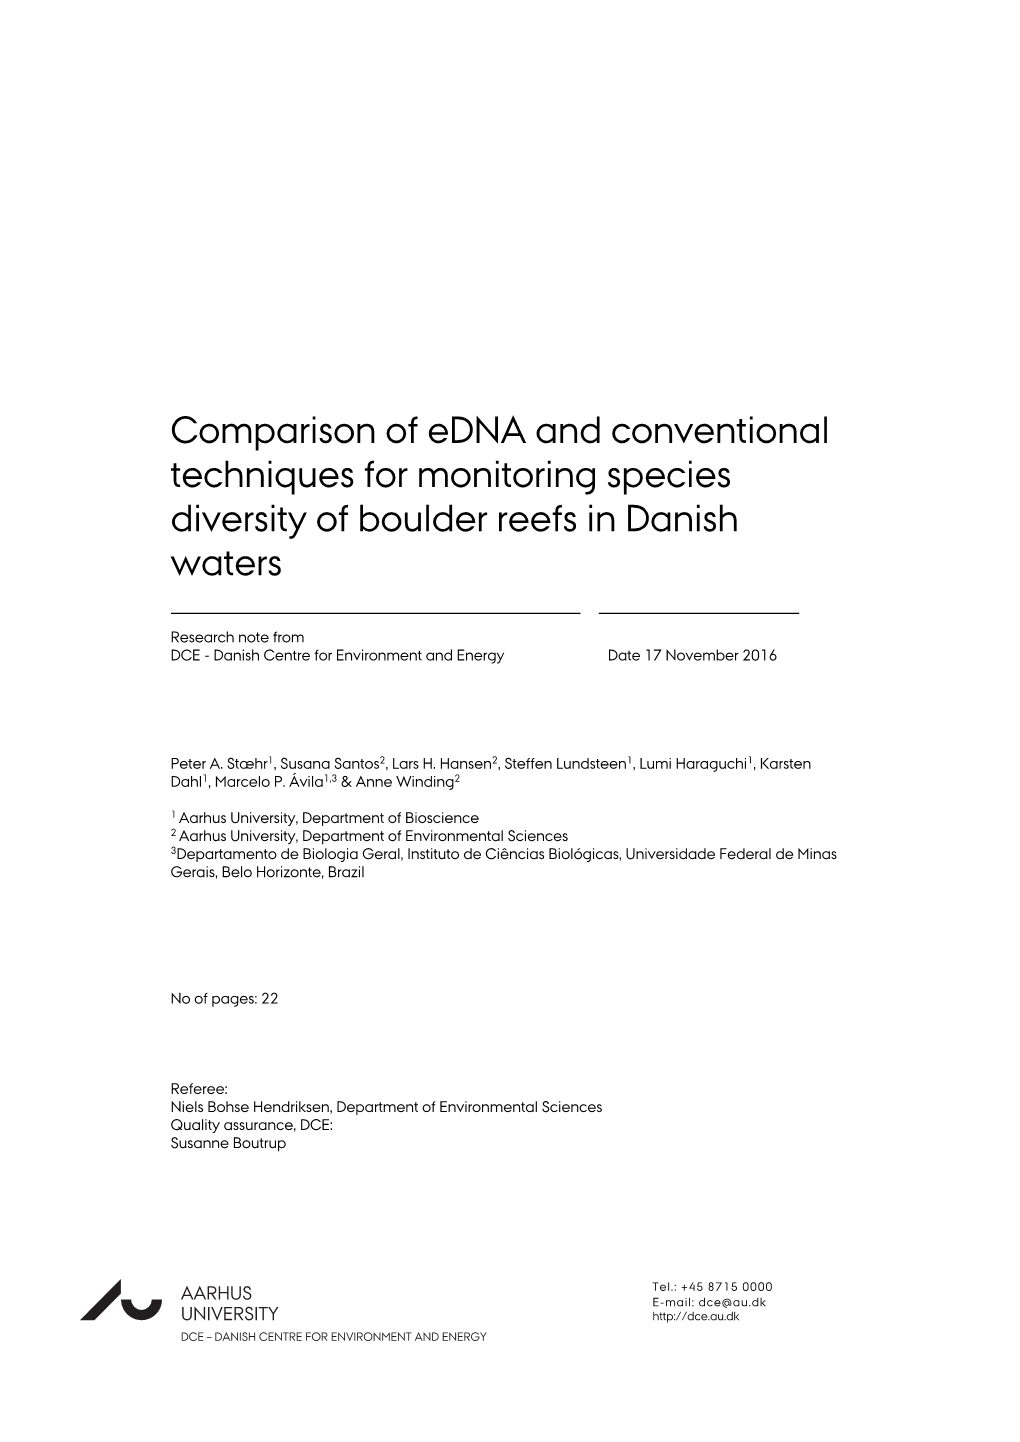 Comparison of Edna and Conventional Techniques for Monitoring Species Diversity of Boulder Reefs in Danish Waters